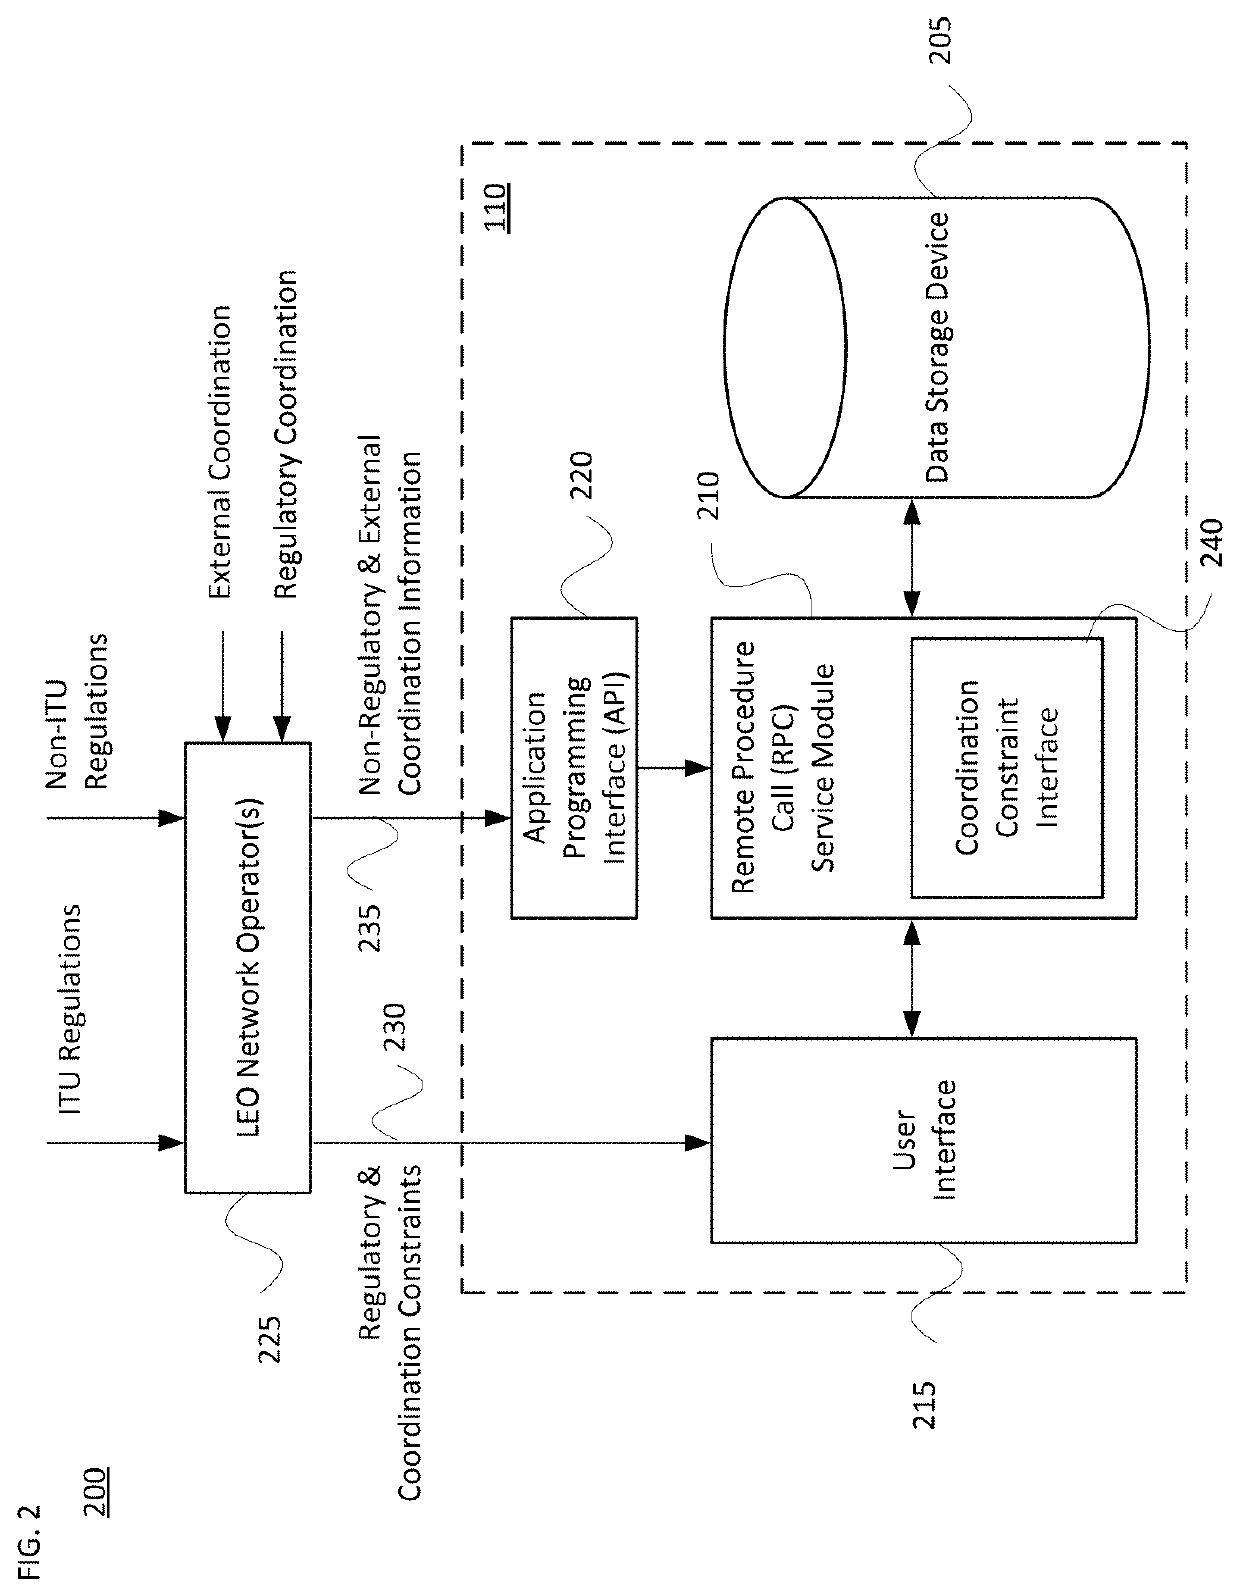 Coordination of spectrum allocation and interference avoidance among high-altitude networks